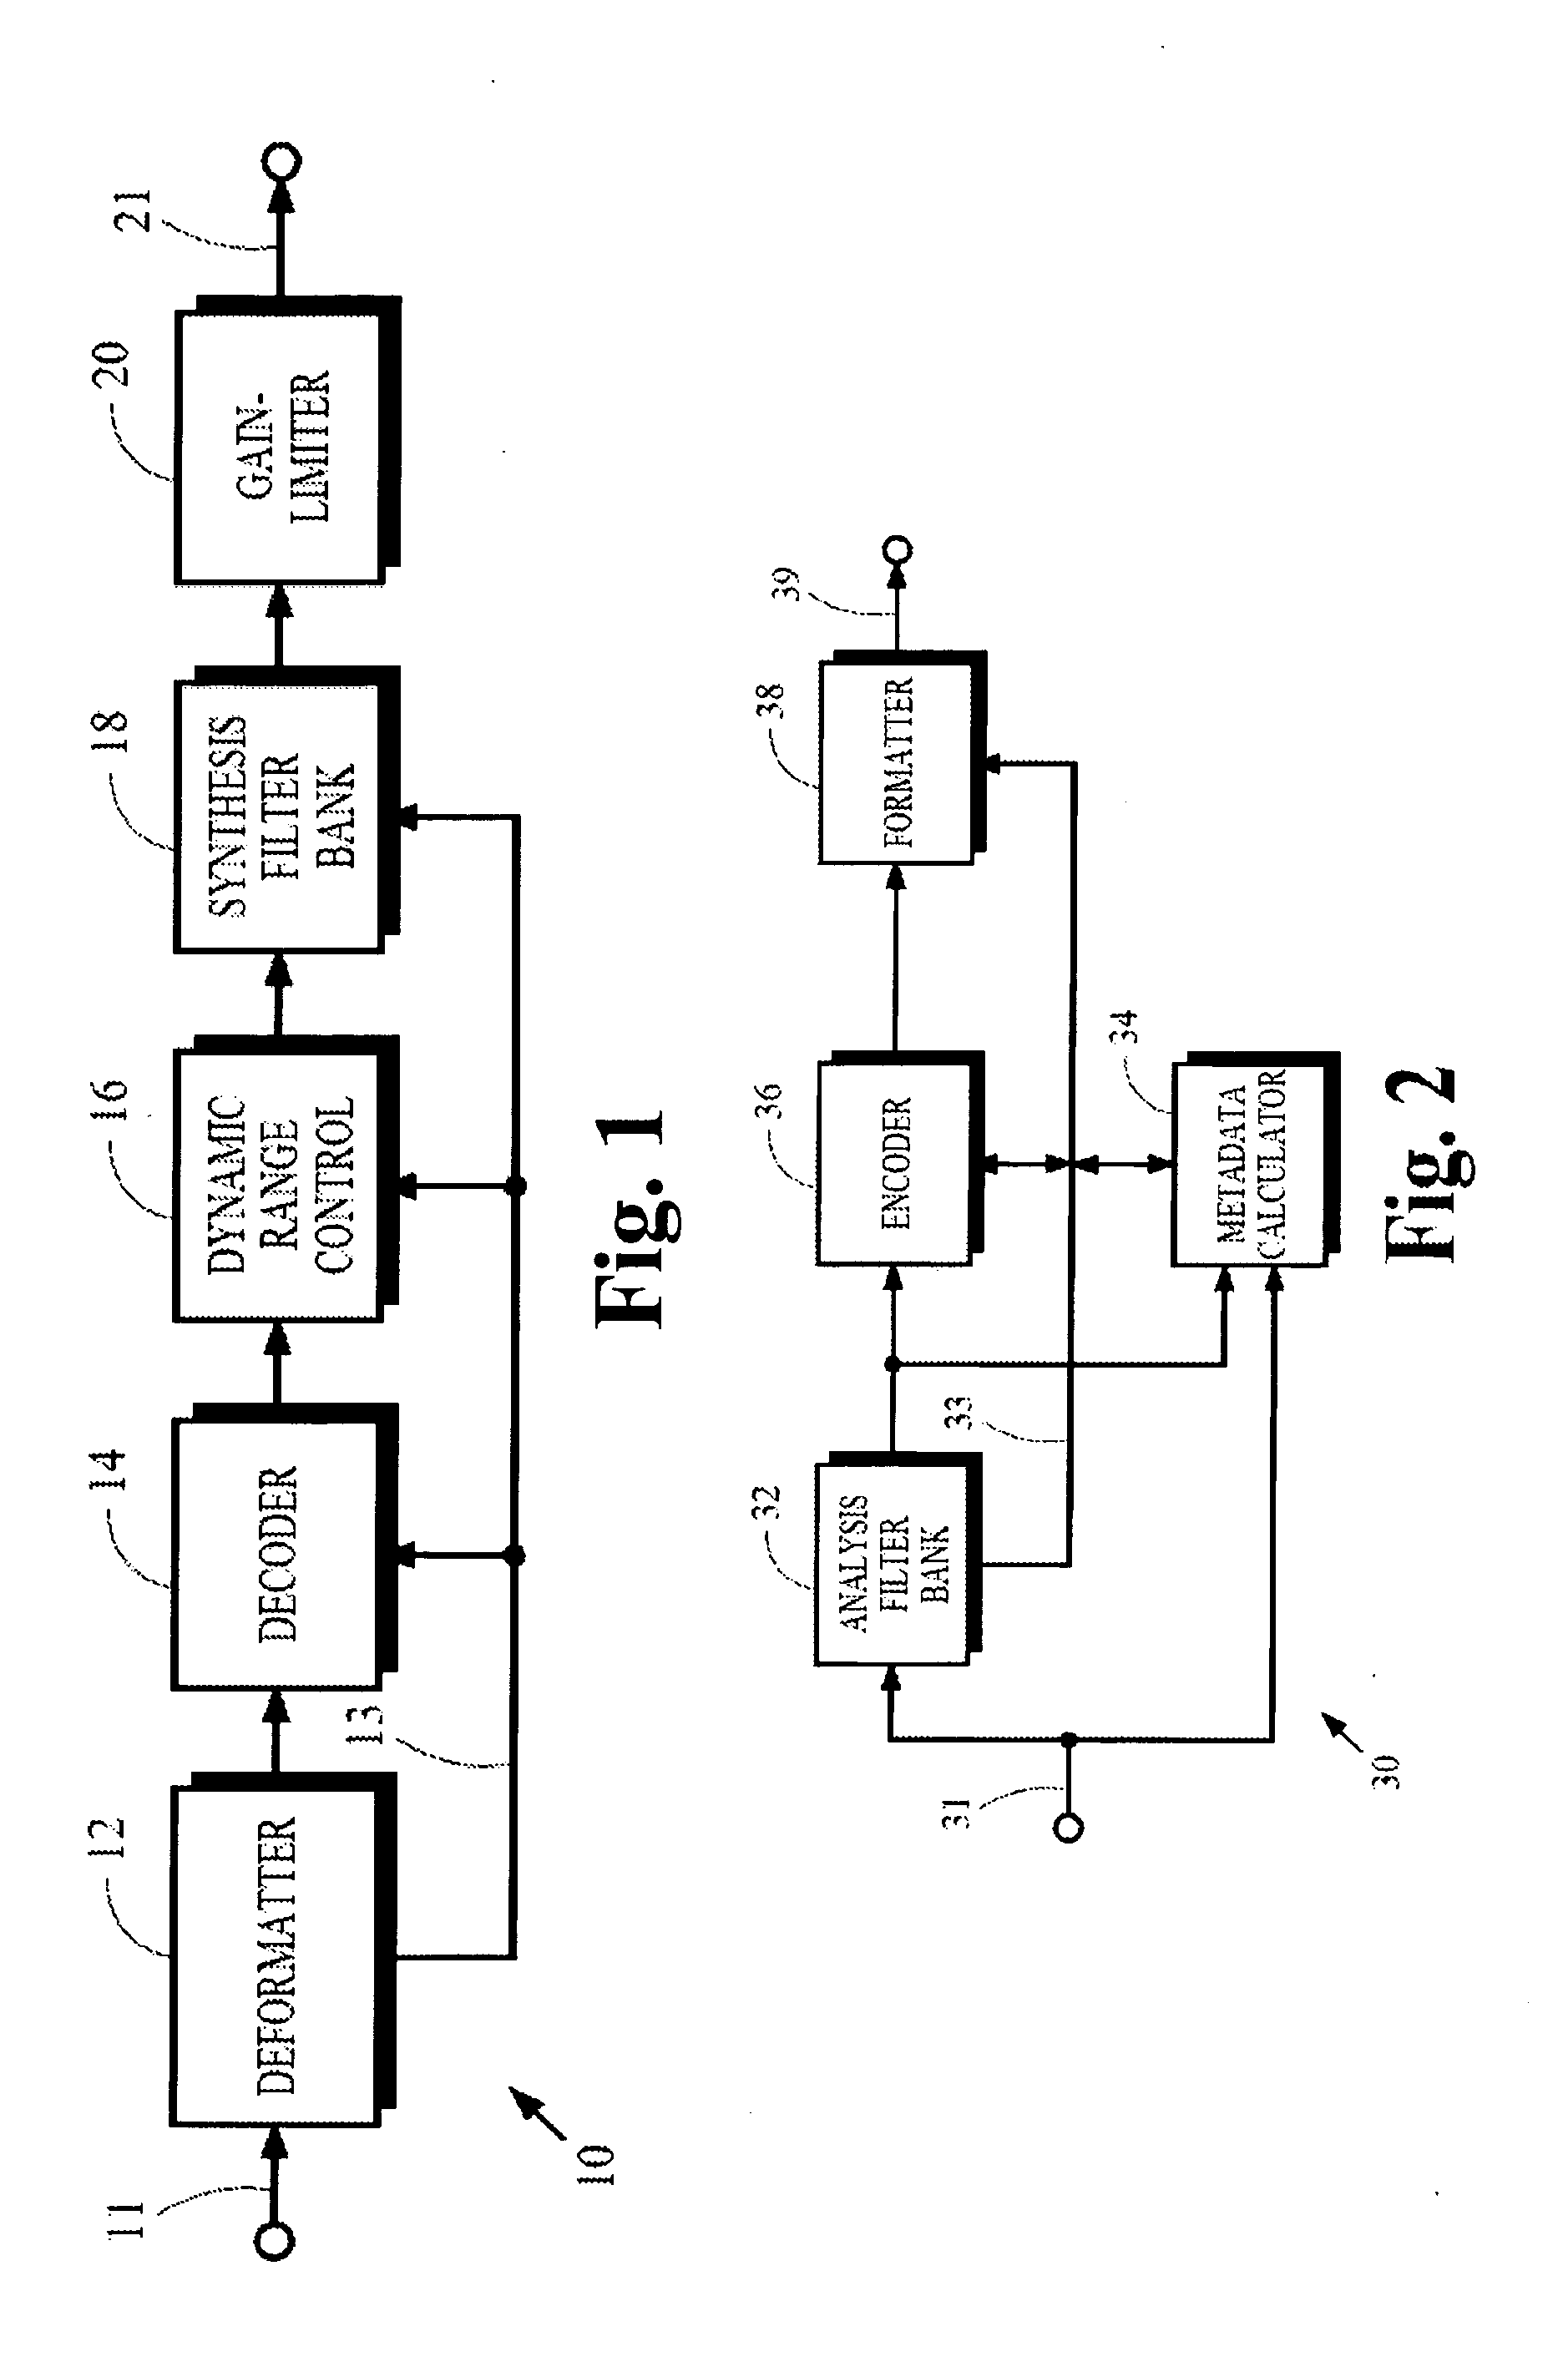 System and Method for Non-destructively Normalizing Loudness of Audio Signals Within Portable Devices